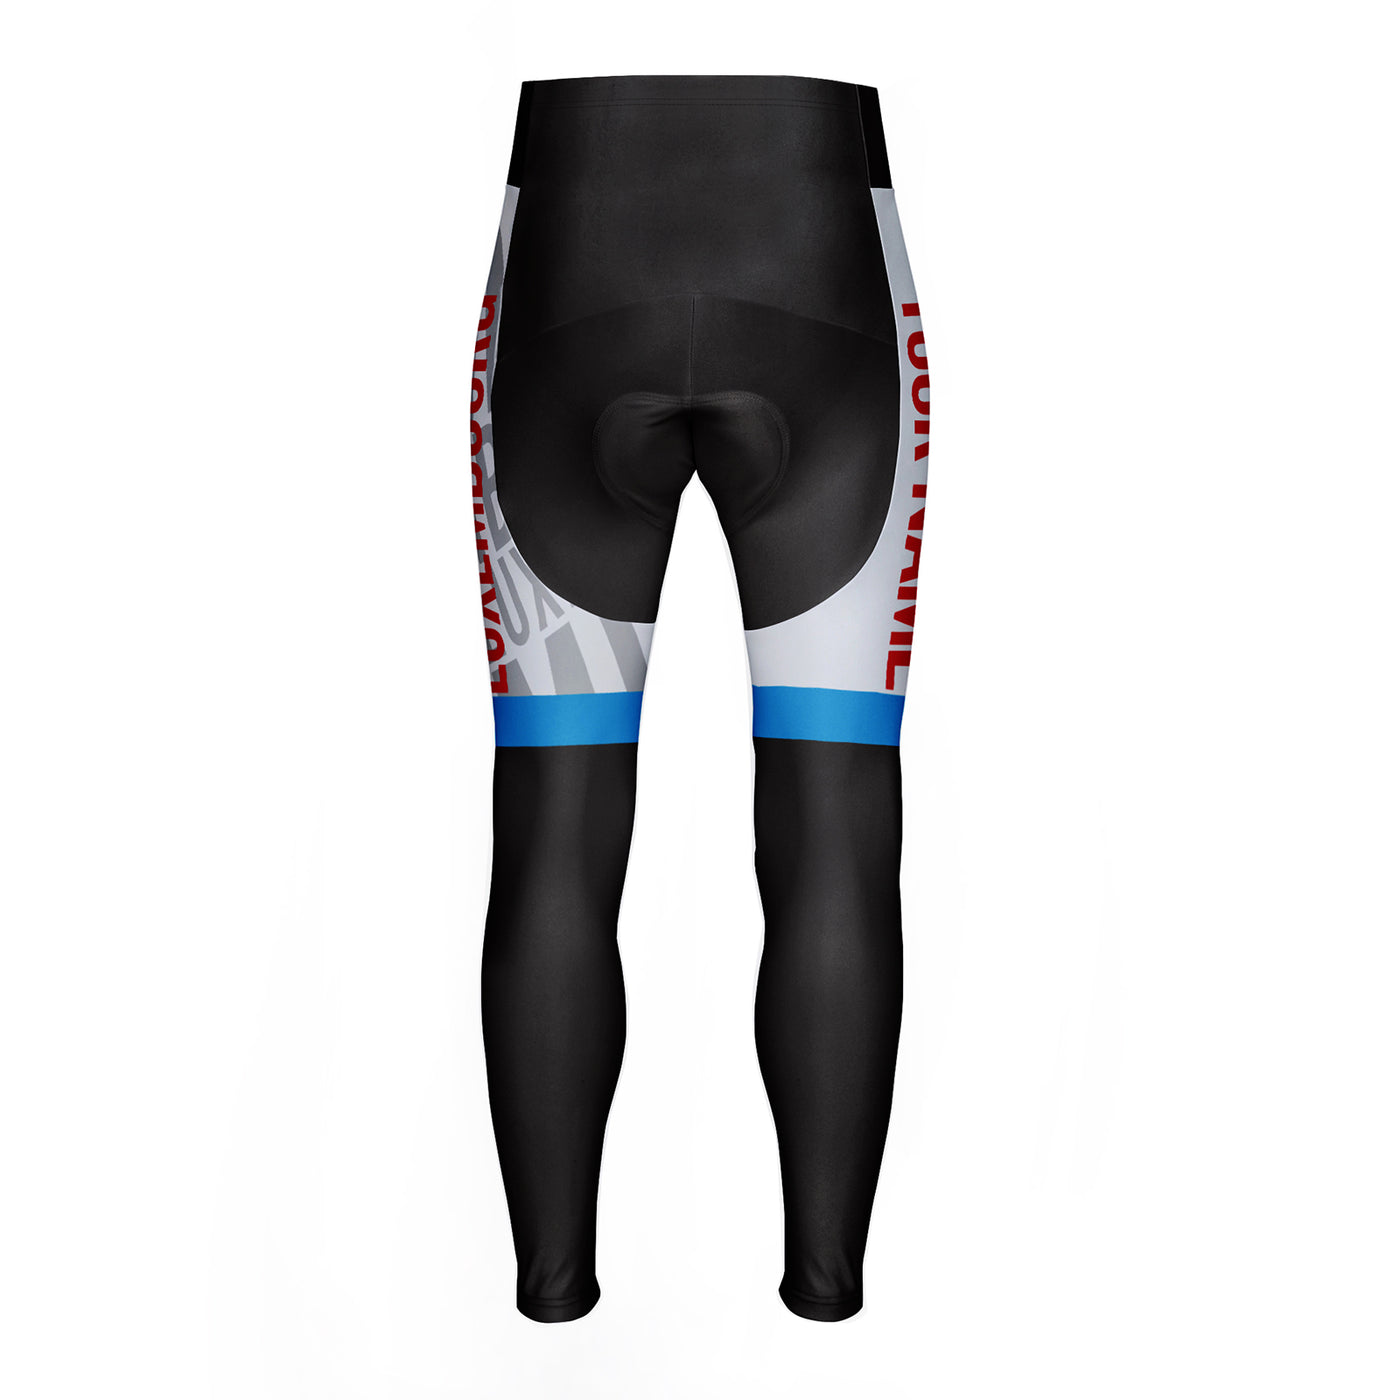 Customized Luxembourg Unisex Cycling Tights Long Pants